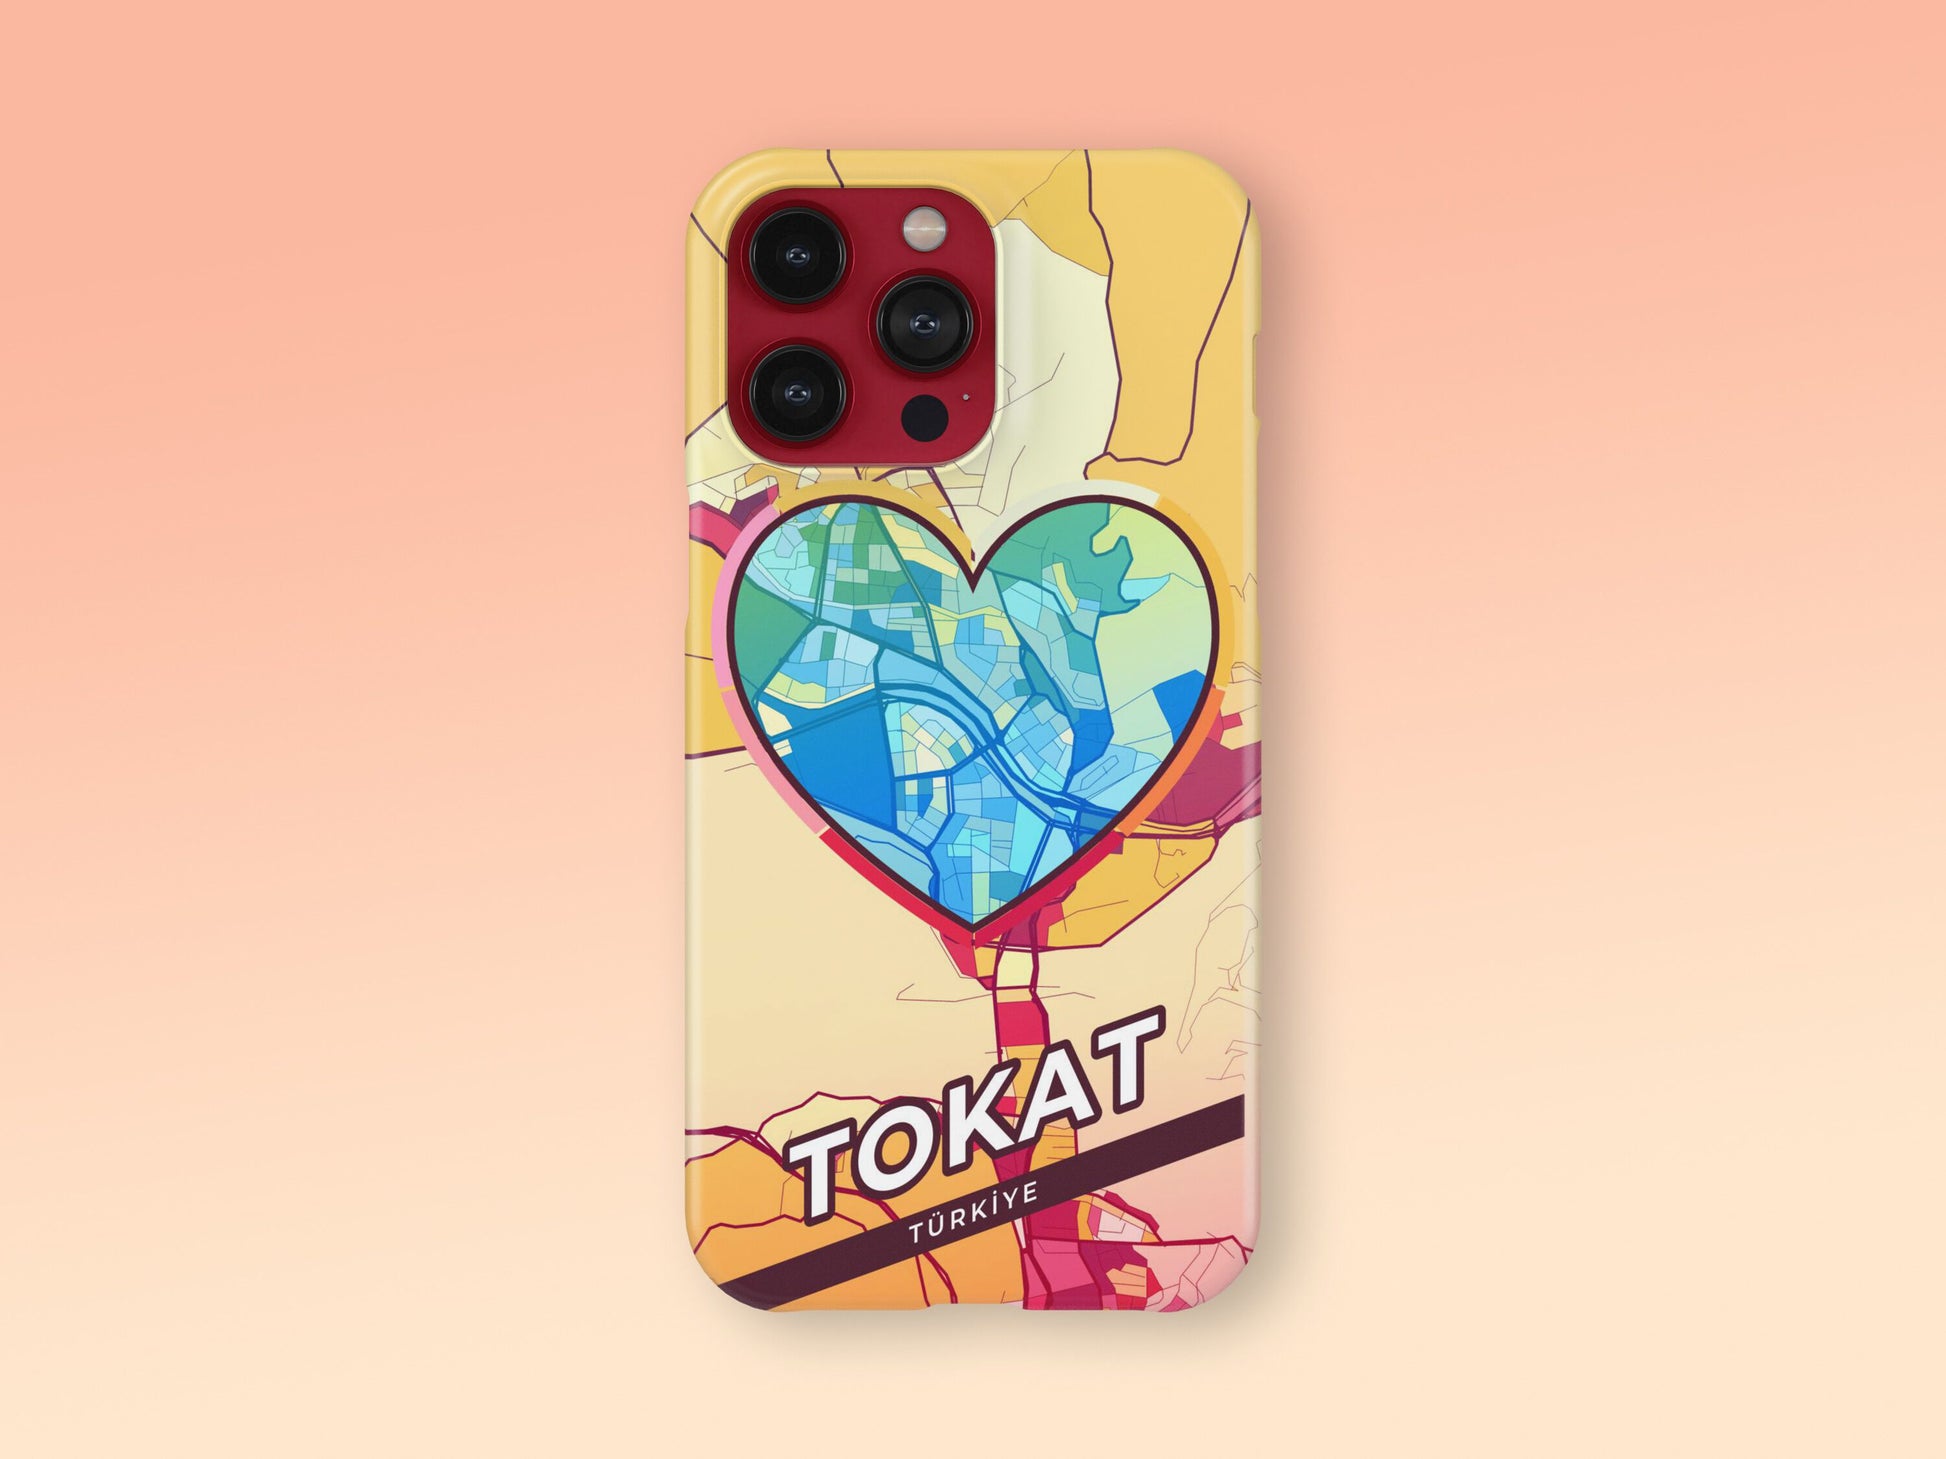 Tokat Turkey slim phone case with colorful icon 2